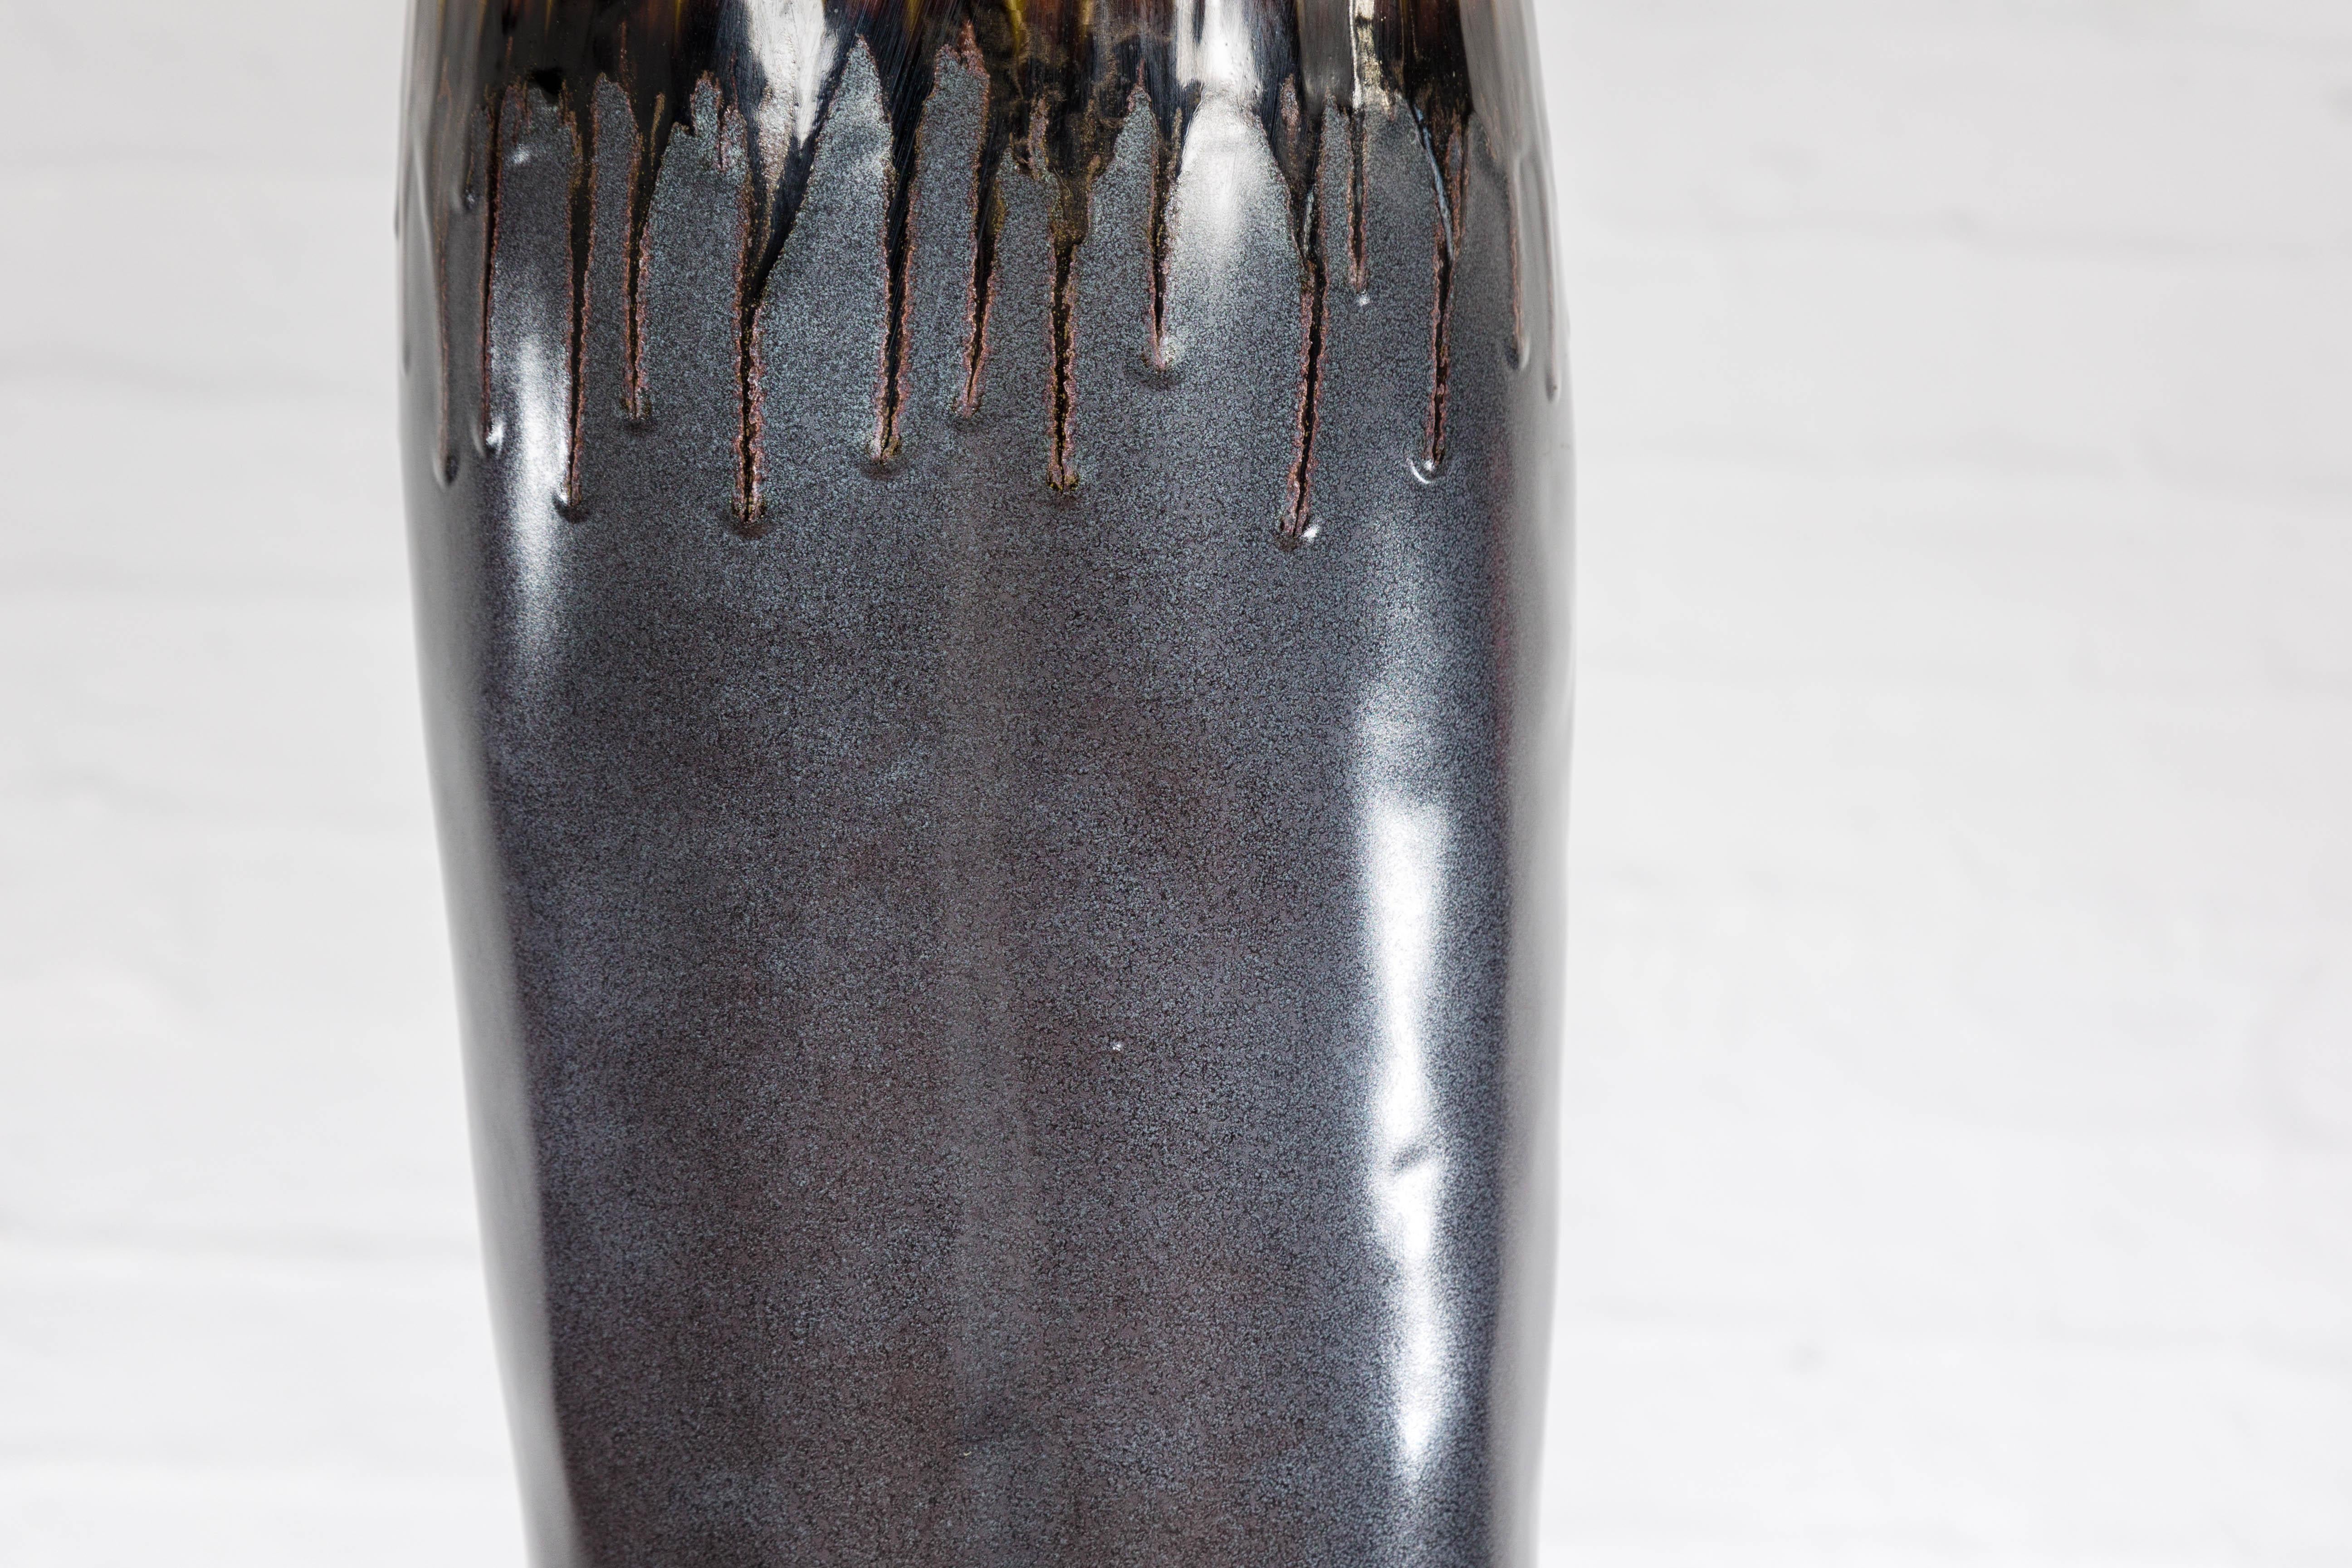 Handmade Artisan Ceramic Vase with Olive Green, Dark Grey and Brown Dripping For Sale 5